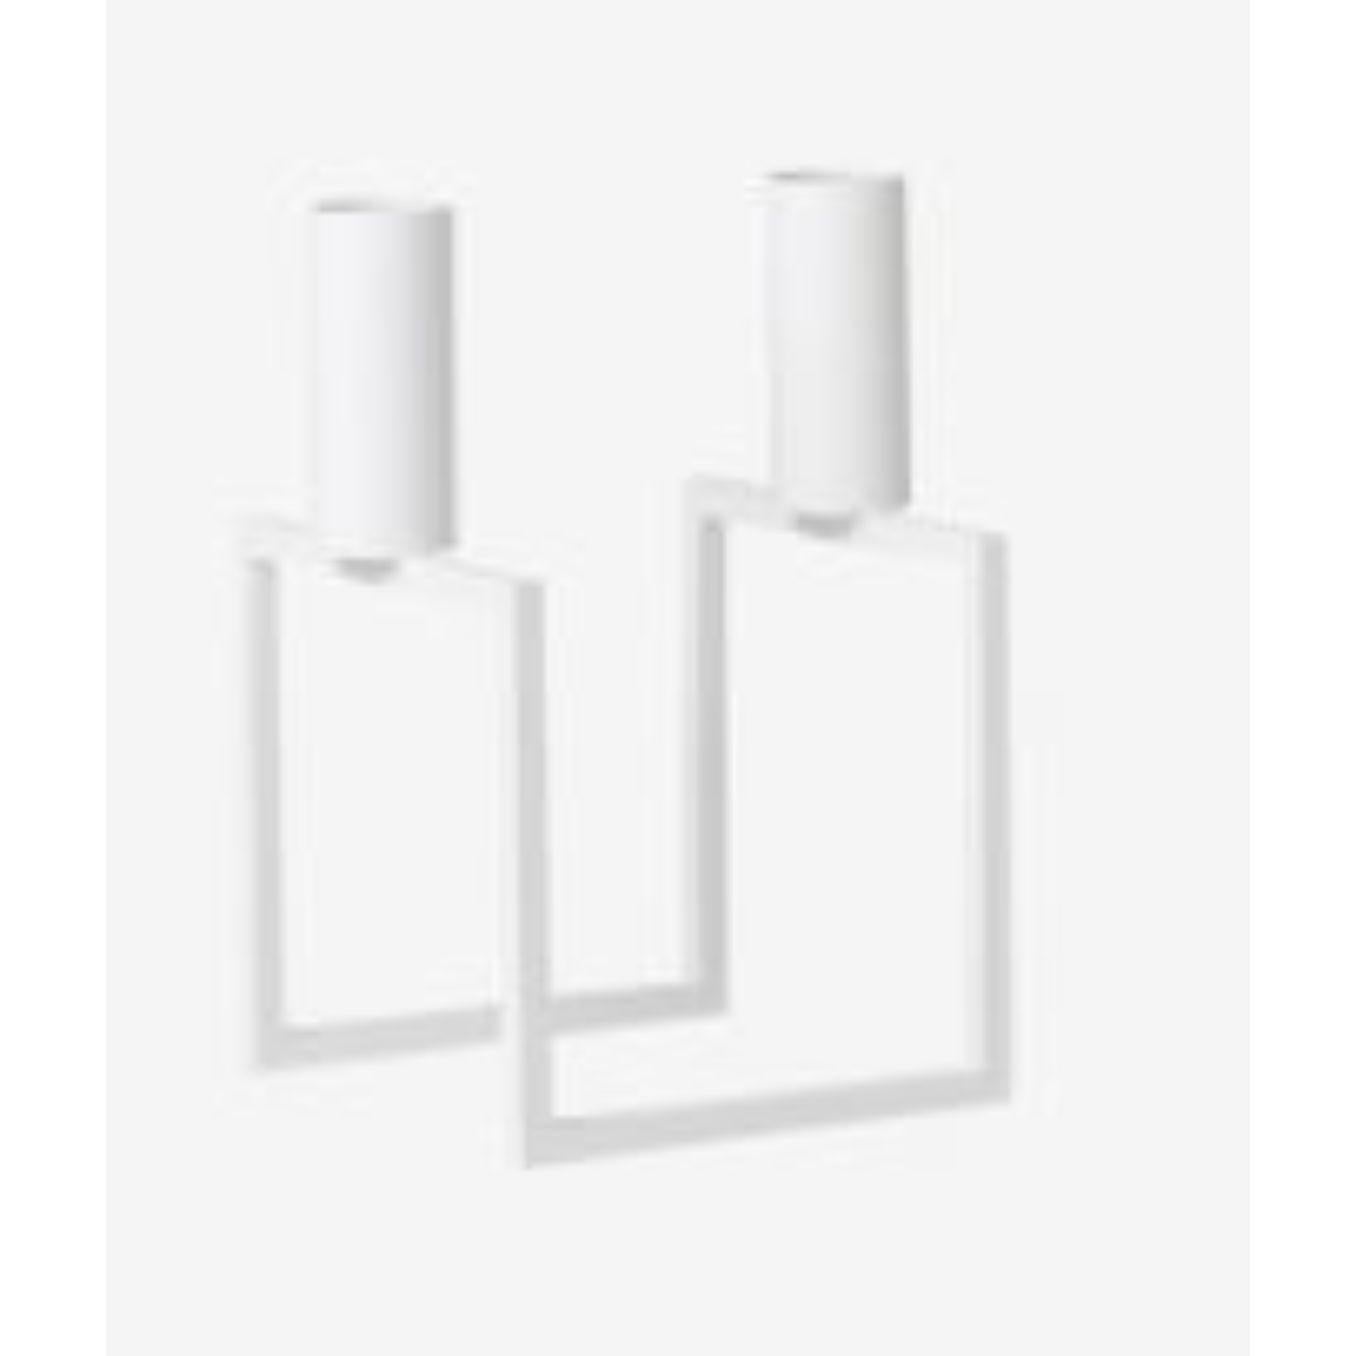 White line candle holder by Lassen
Dimensions: D 10 x W 10 x H 16 cm 
Materials: Metal 
Also available in different dimensions. 
Weight: 0.60 Kg

With a sharp sense of contemporary Functionalist style, Mogens Lassen designed the iconic Kubus